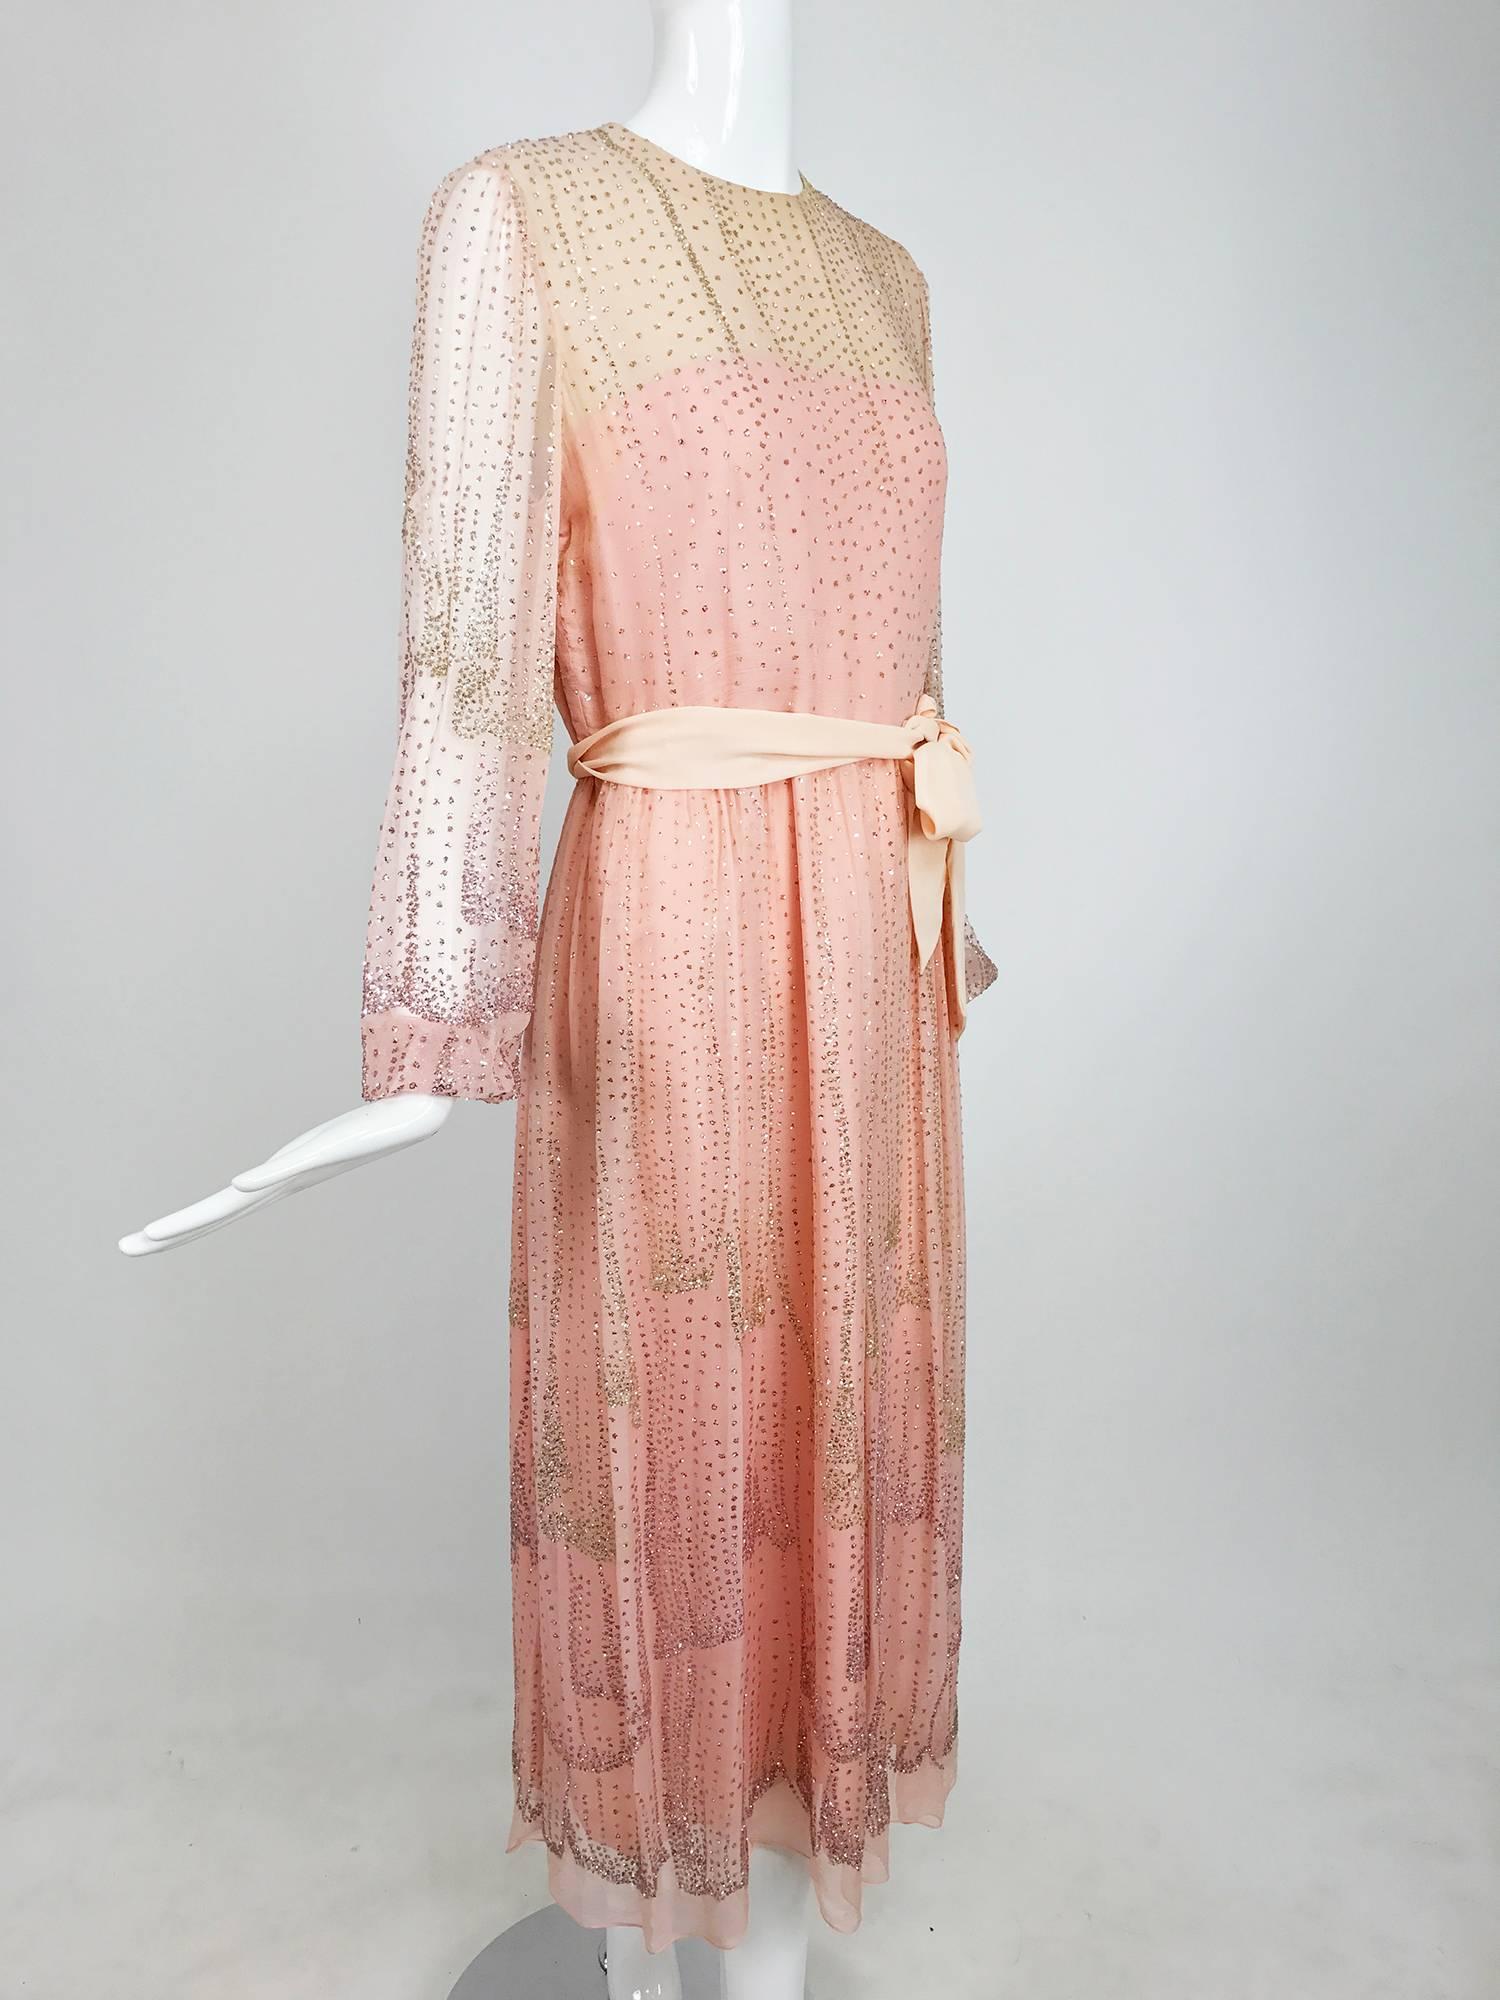 Beautiful soft pink silk chiffon dress from the 1970s, labeled Richilene...The fabric of the dress is decorated with silver and pink glitter done in a cascading design on the skirt and vertical icicles on the bodice and sleeves, there is some